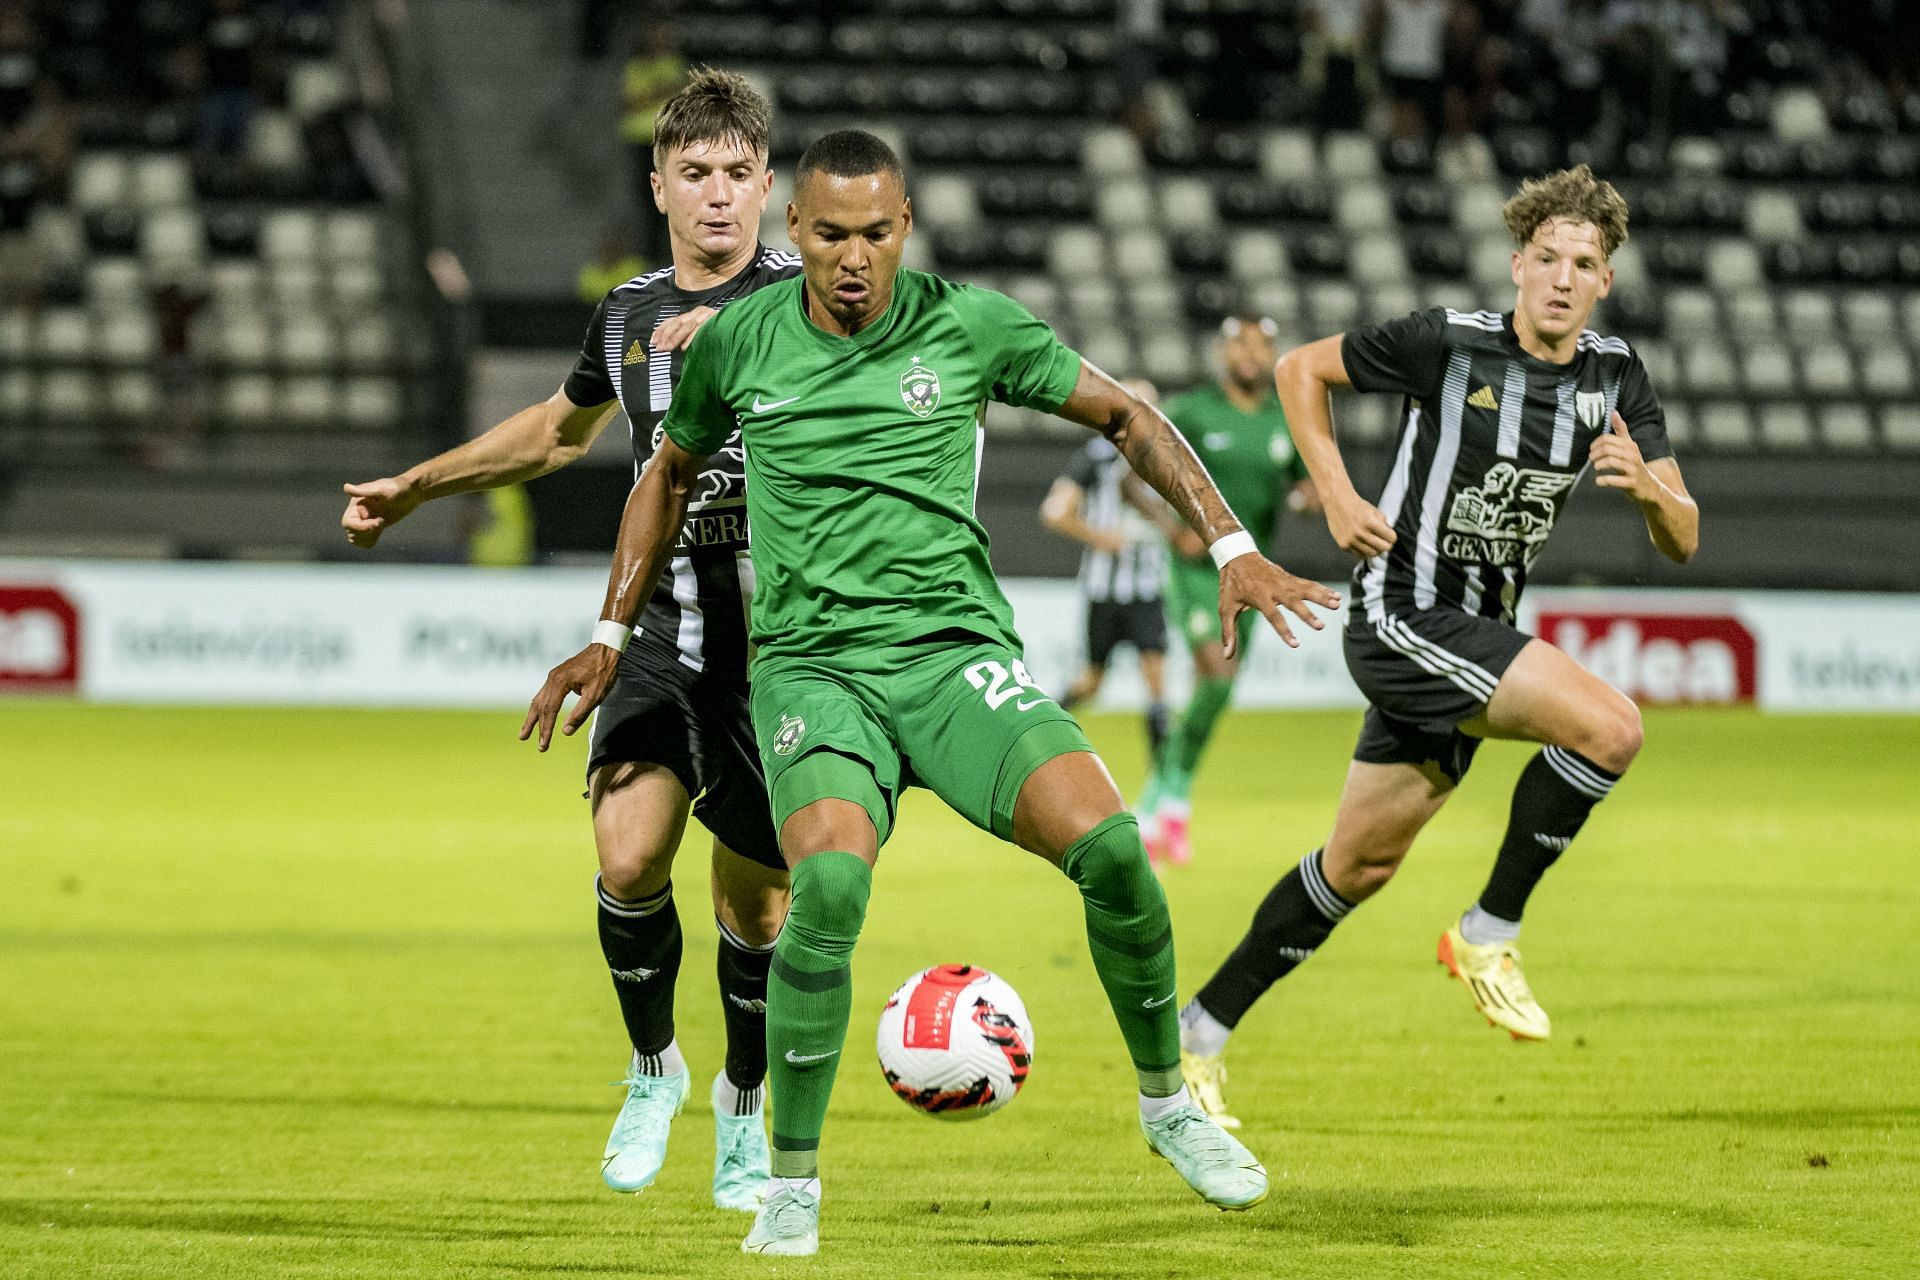 PFC Ludogorets hope to reach the UEFA Europa League group stage by beating Zalgiris